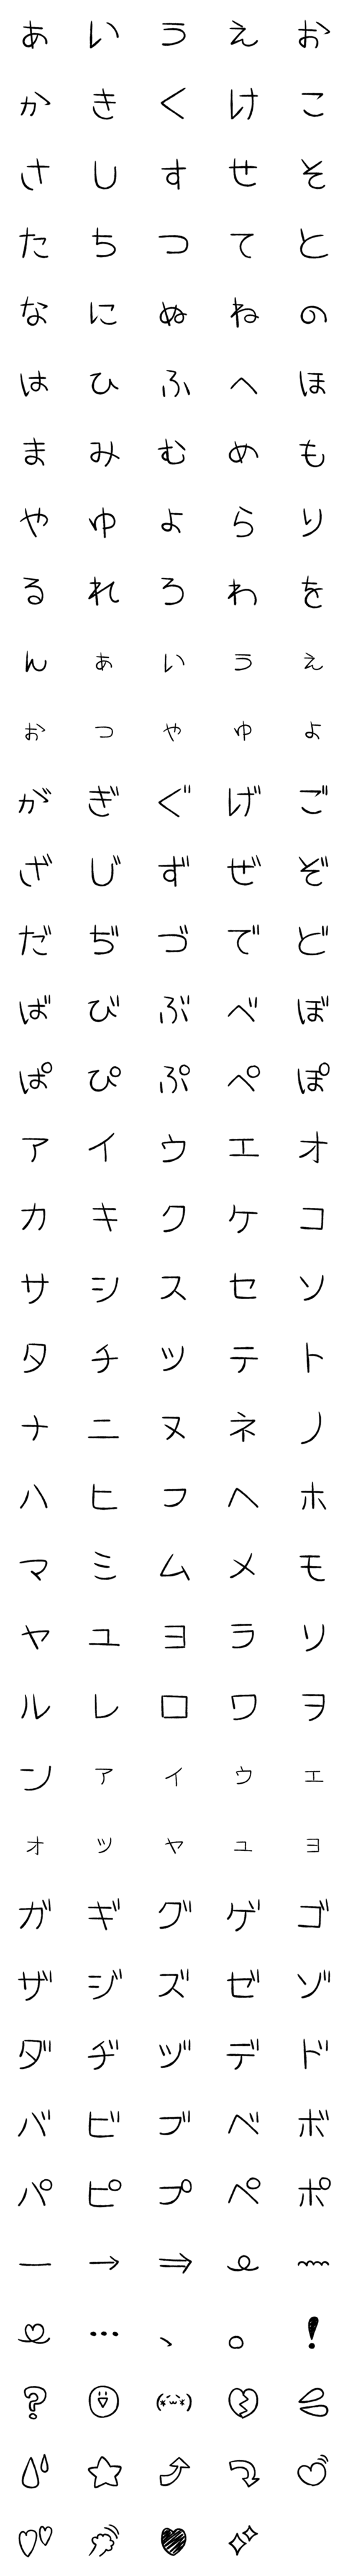 [LINE絵文字]女の子の丸っこい文字の画像一覧